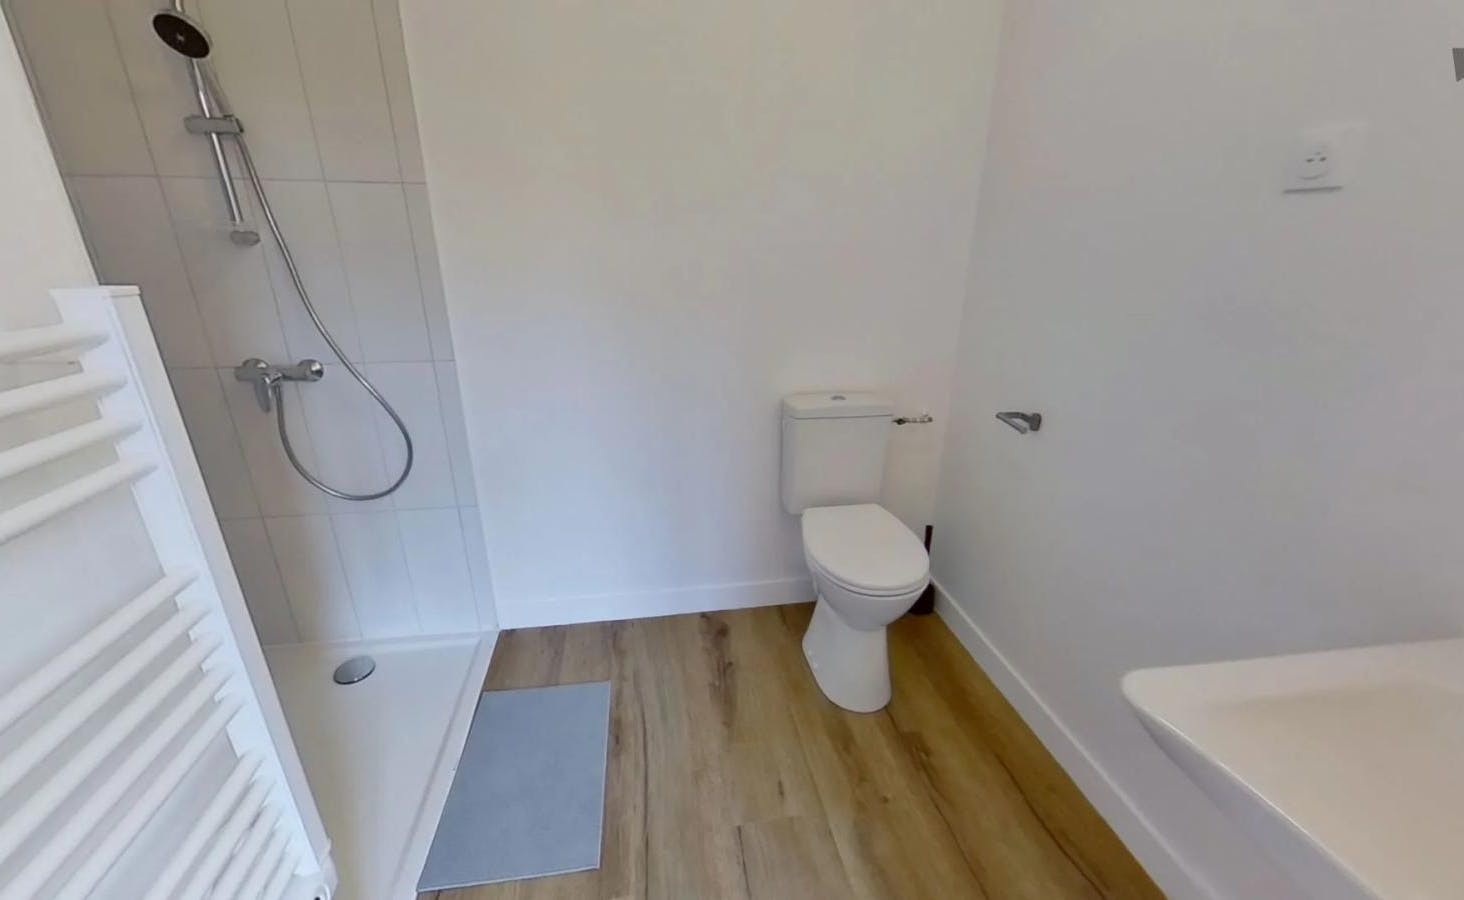 Delightful double ensuite bedroom in proximity to Bois Colombes train station